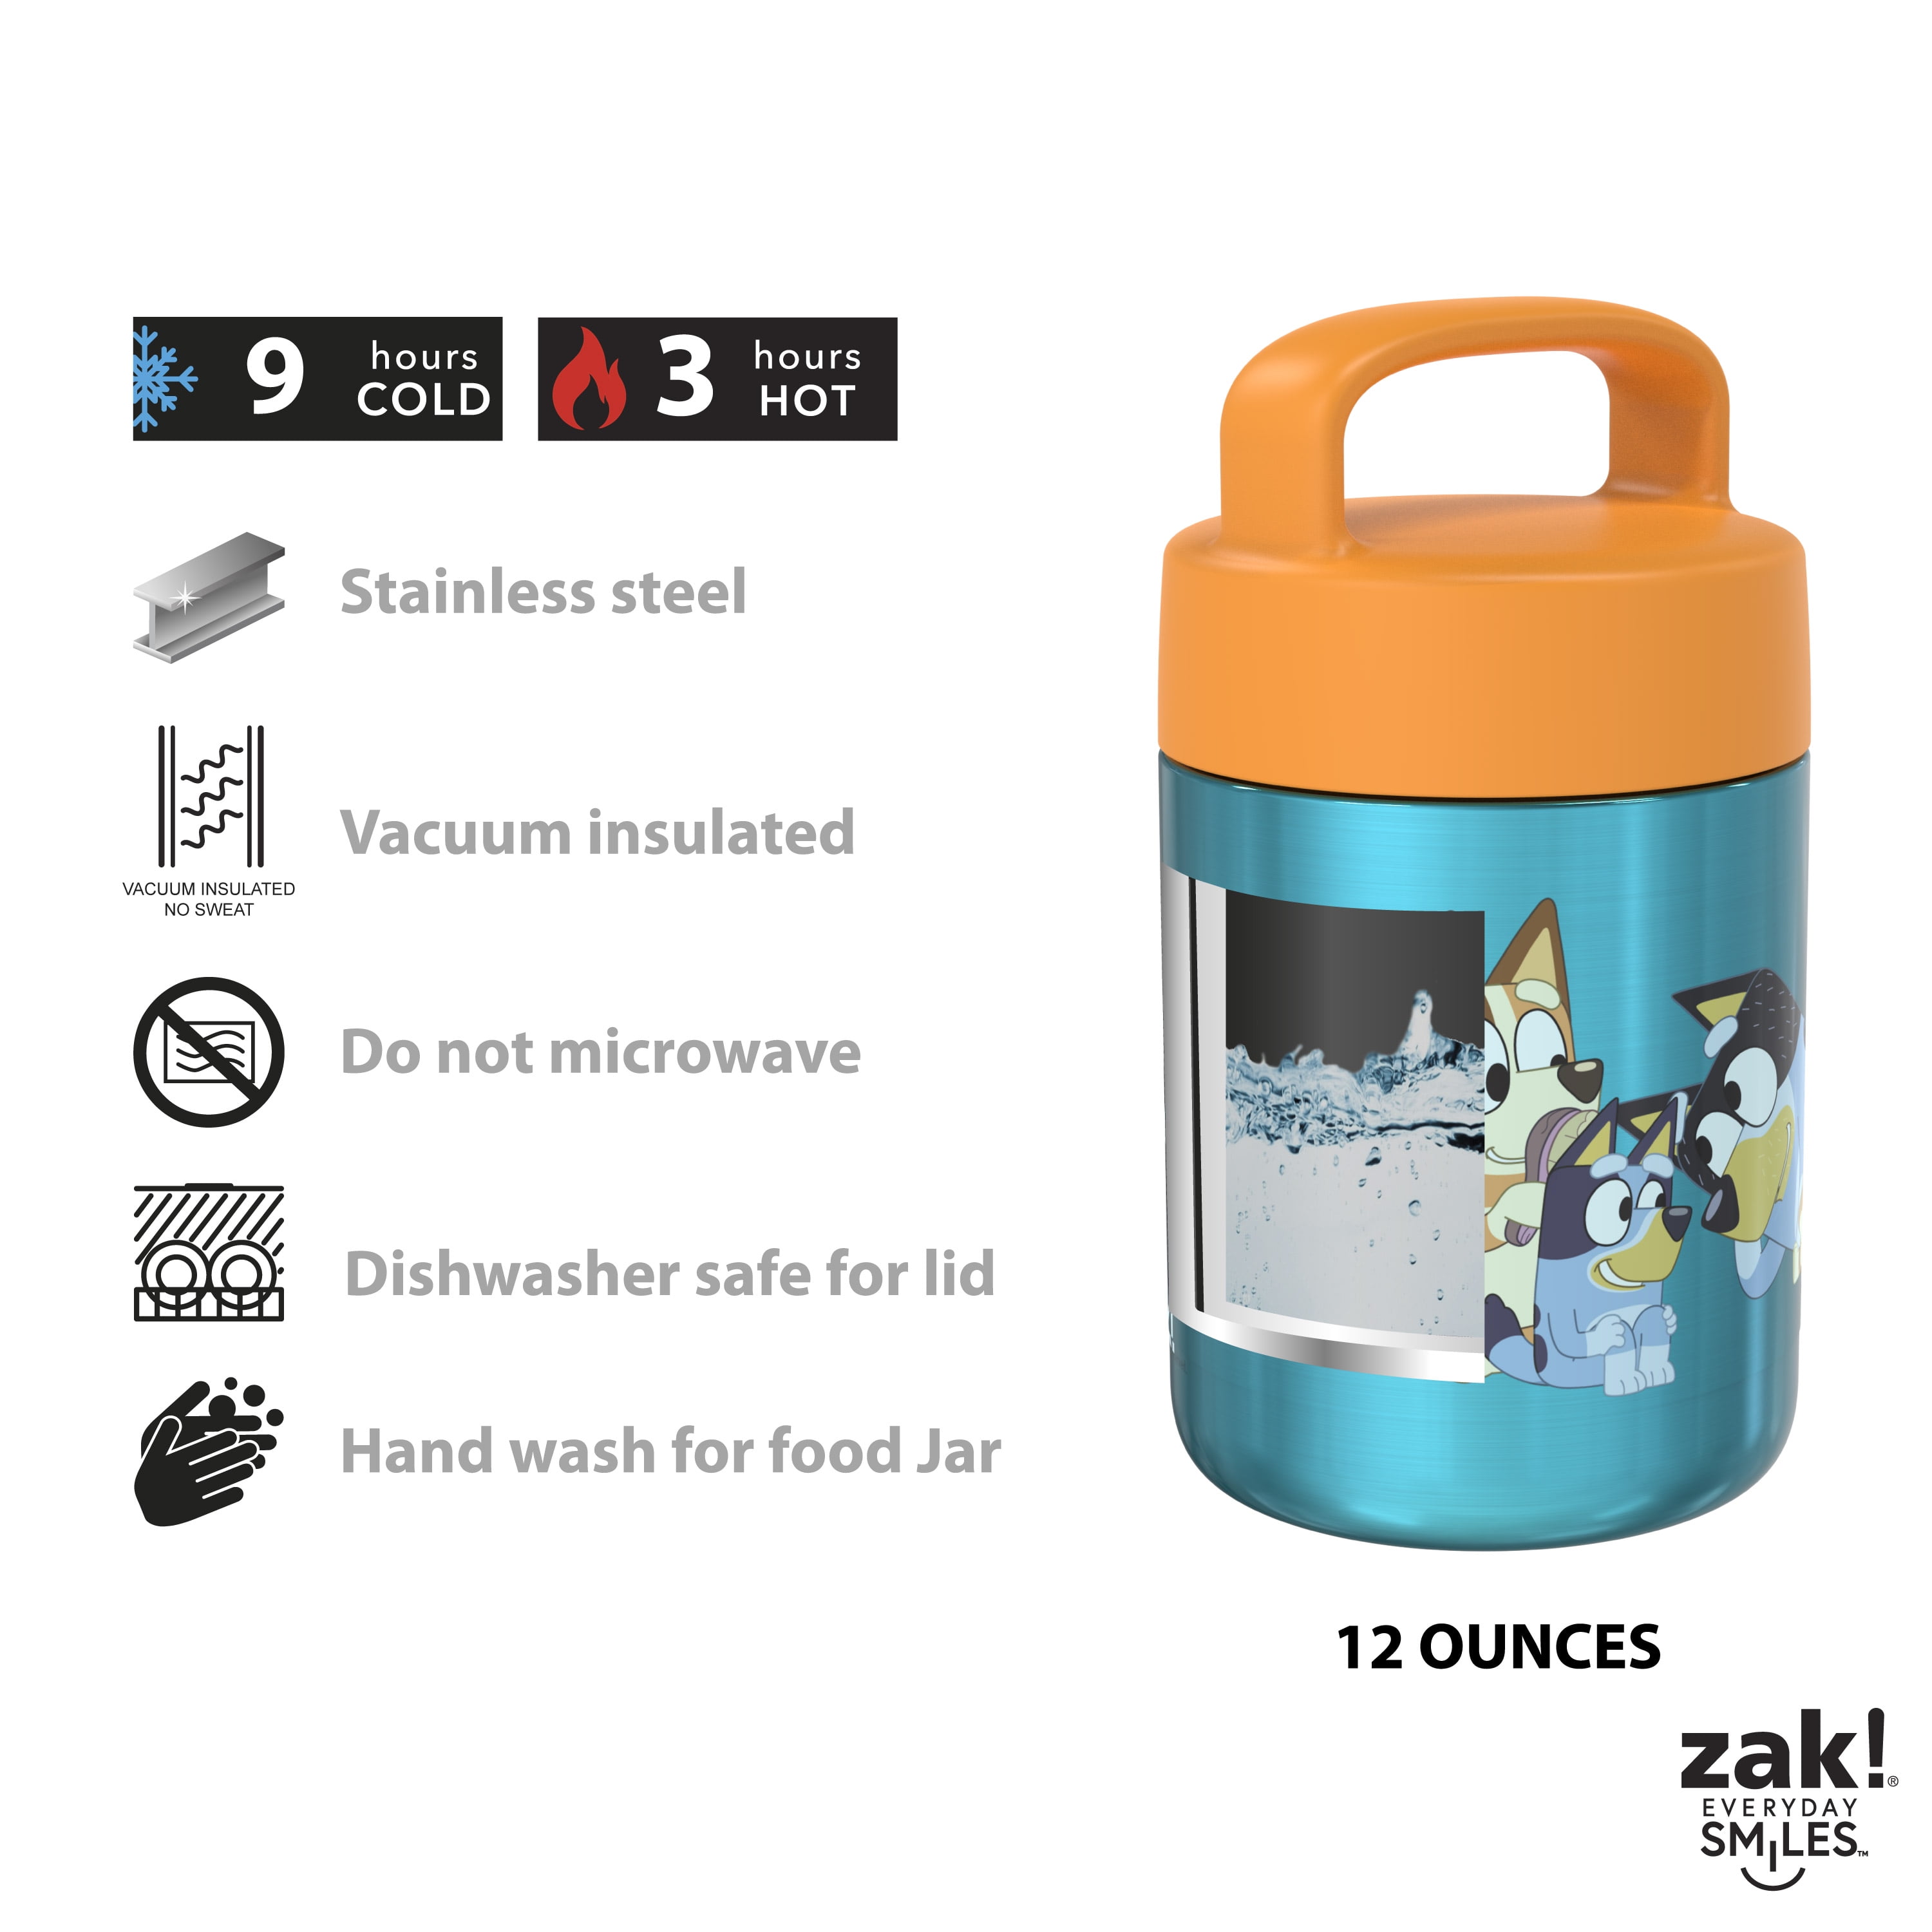 Zak Designs Bluey Reusable Plastic Bento Box with Leak-Proof Seal, Carrying Handle, Microwave Steam Vent, and Individual Containers for Kids' Packed